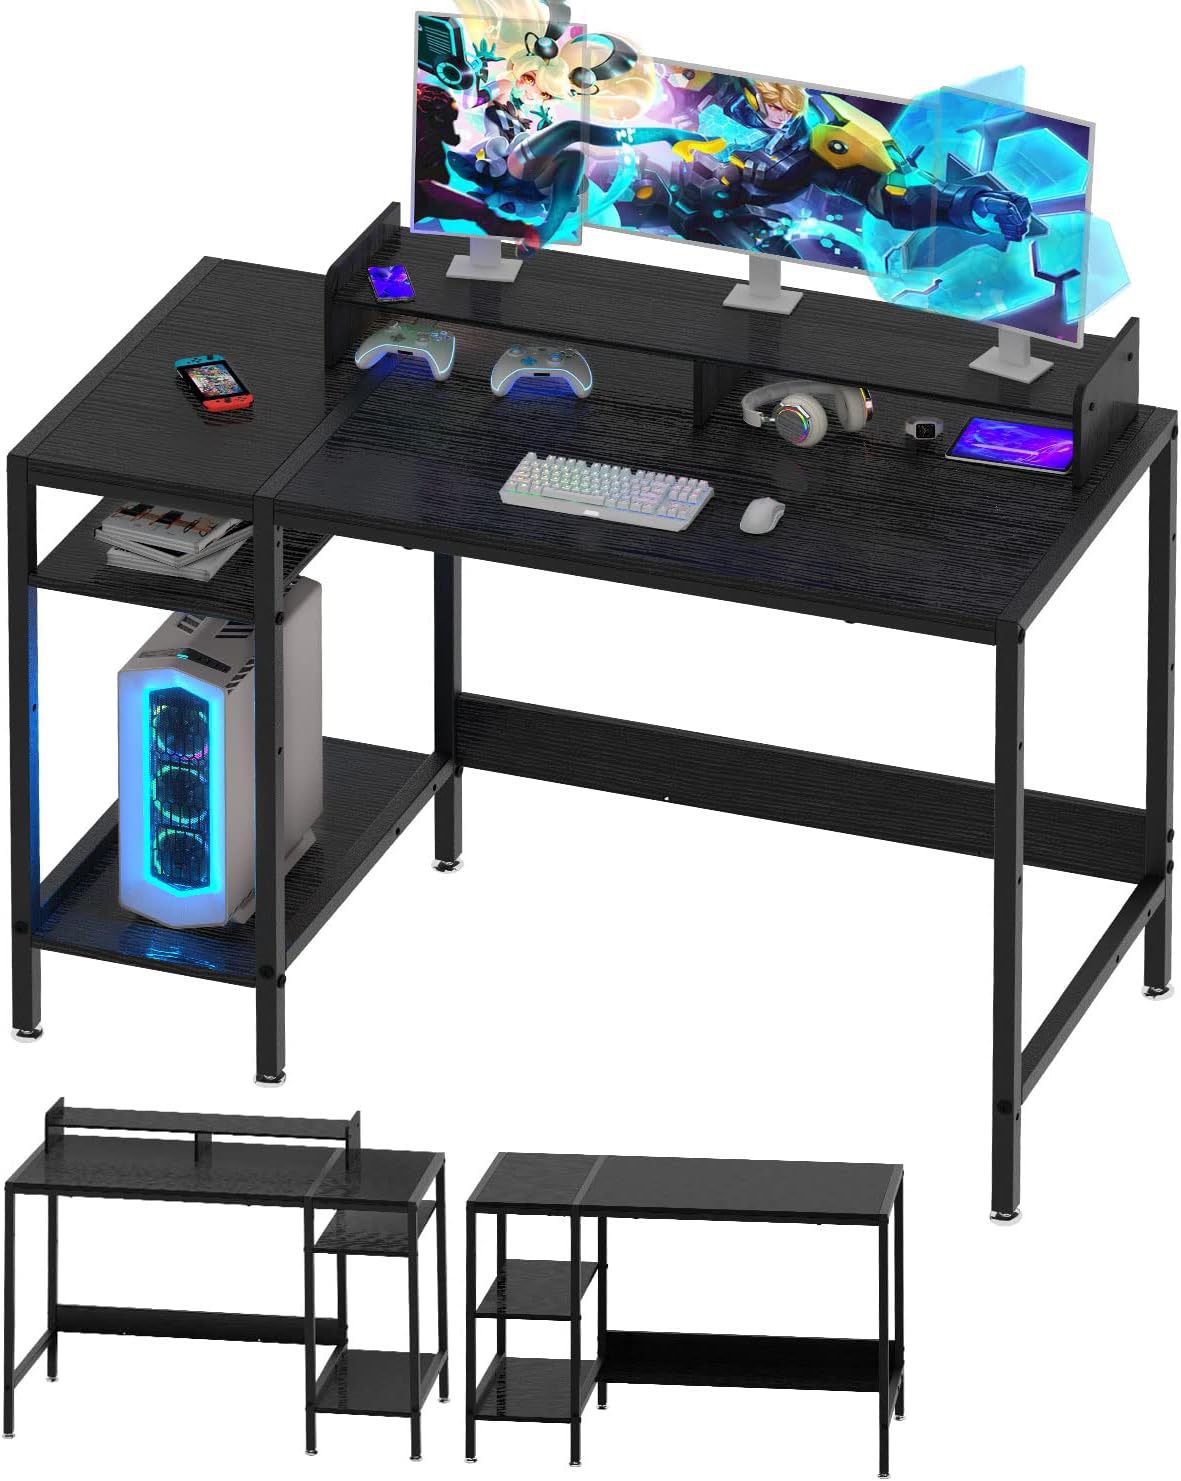 MINOSYS Computer Desk - 38" Gaming Desk, Home Office Desk with Storage, Small Desk with Monitor Stand, Writing Desk for 2 Monitors, Adjustable Storage